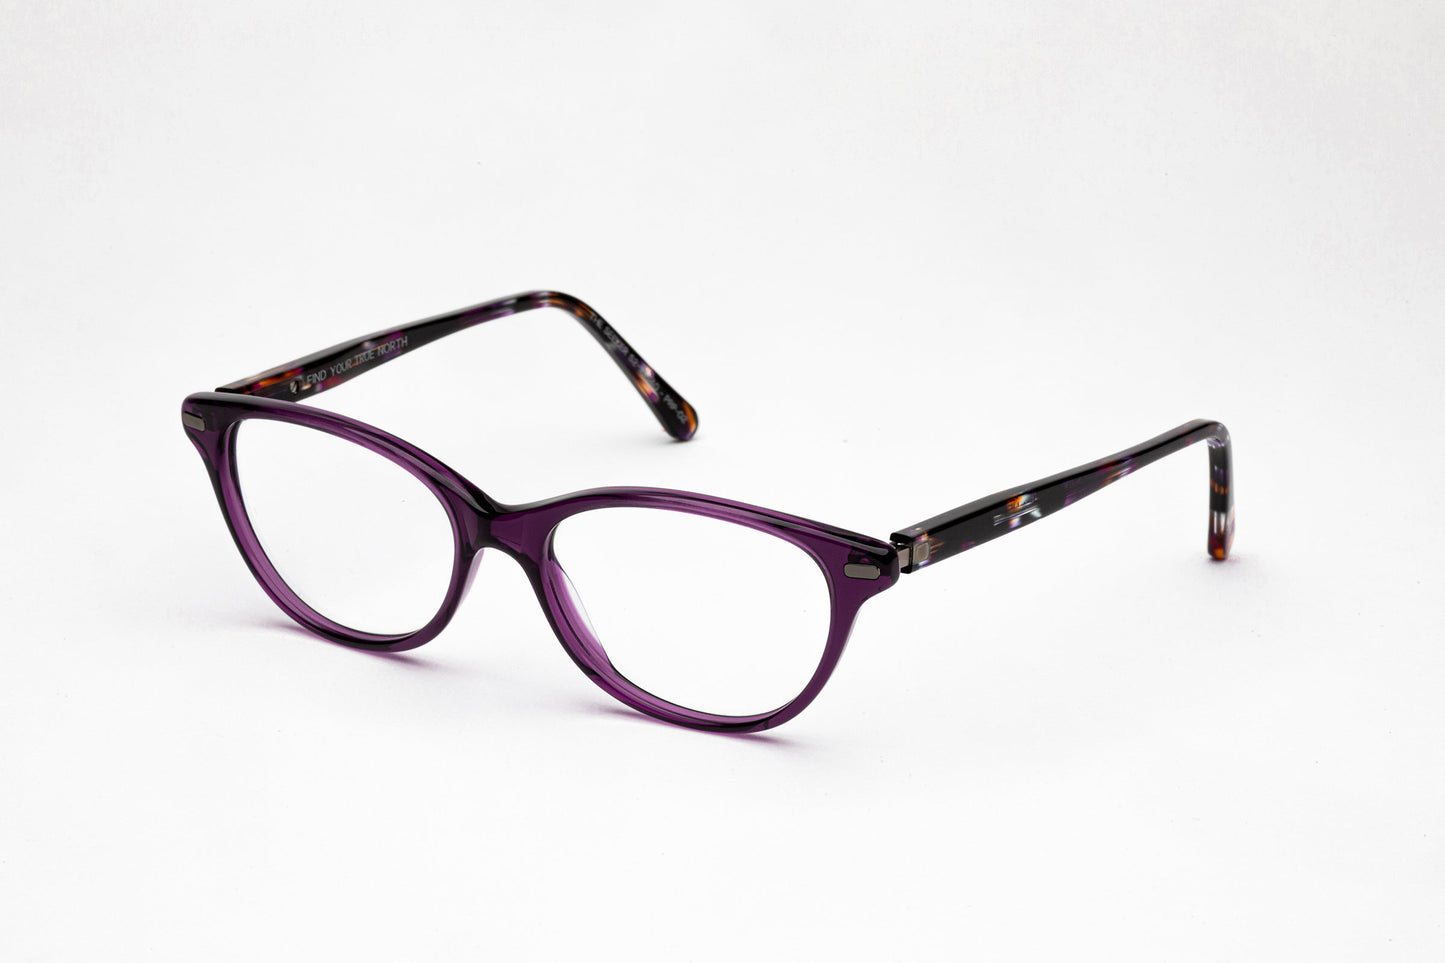 Angled view -Purple cateye glasses with patterned stems